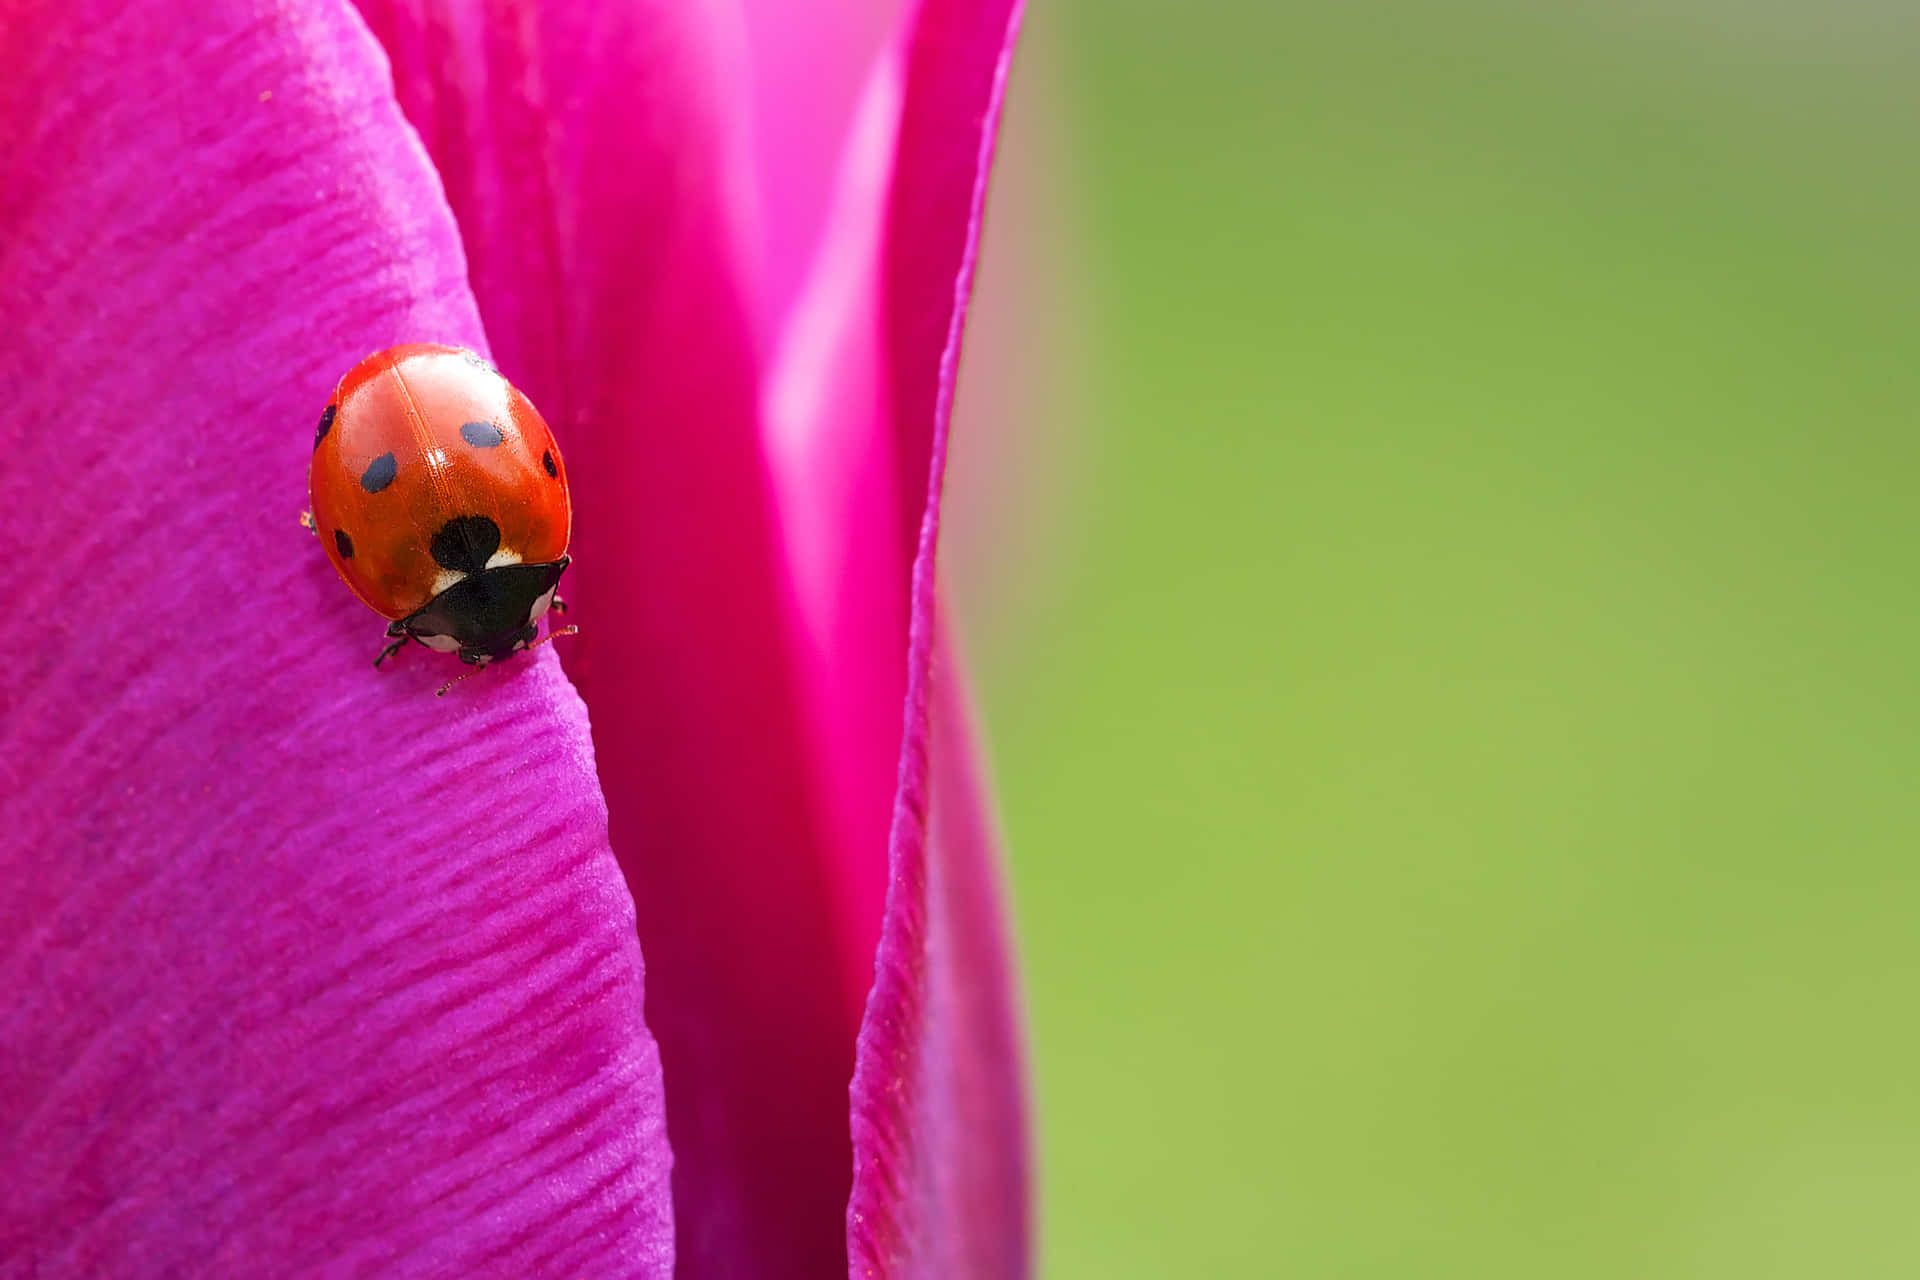 Colorful Ladybug Nestled in Flowers, Ready for an Adventure